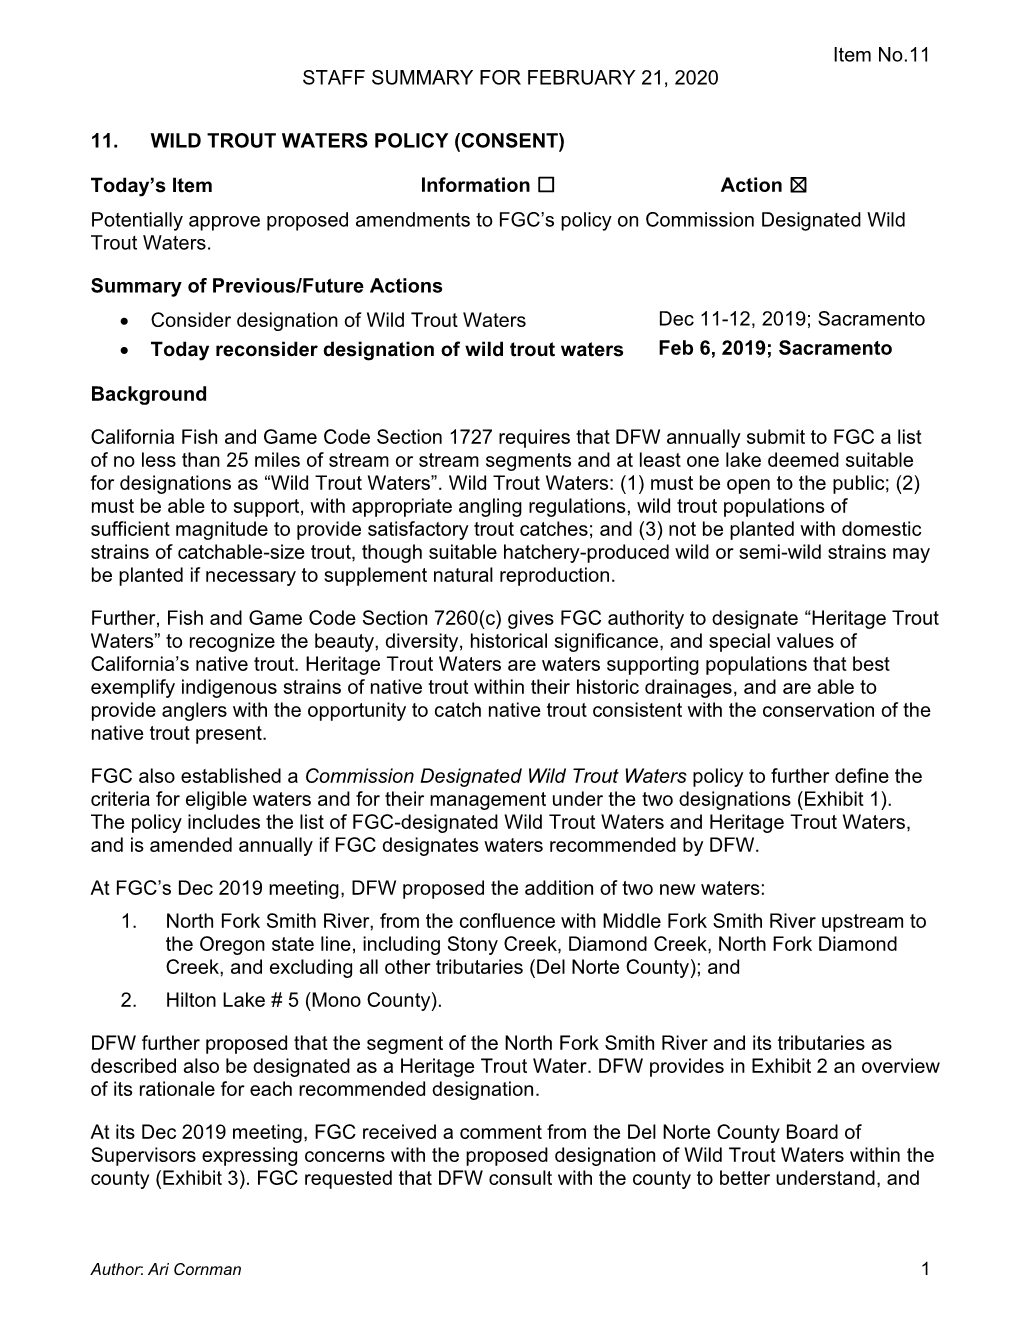 Commission Designated Wild Trout Waters Policy to Further Define the Criteria for Eligible Waters and for Their Management Under the Two Designations (Exhibit 1)